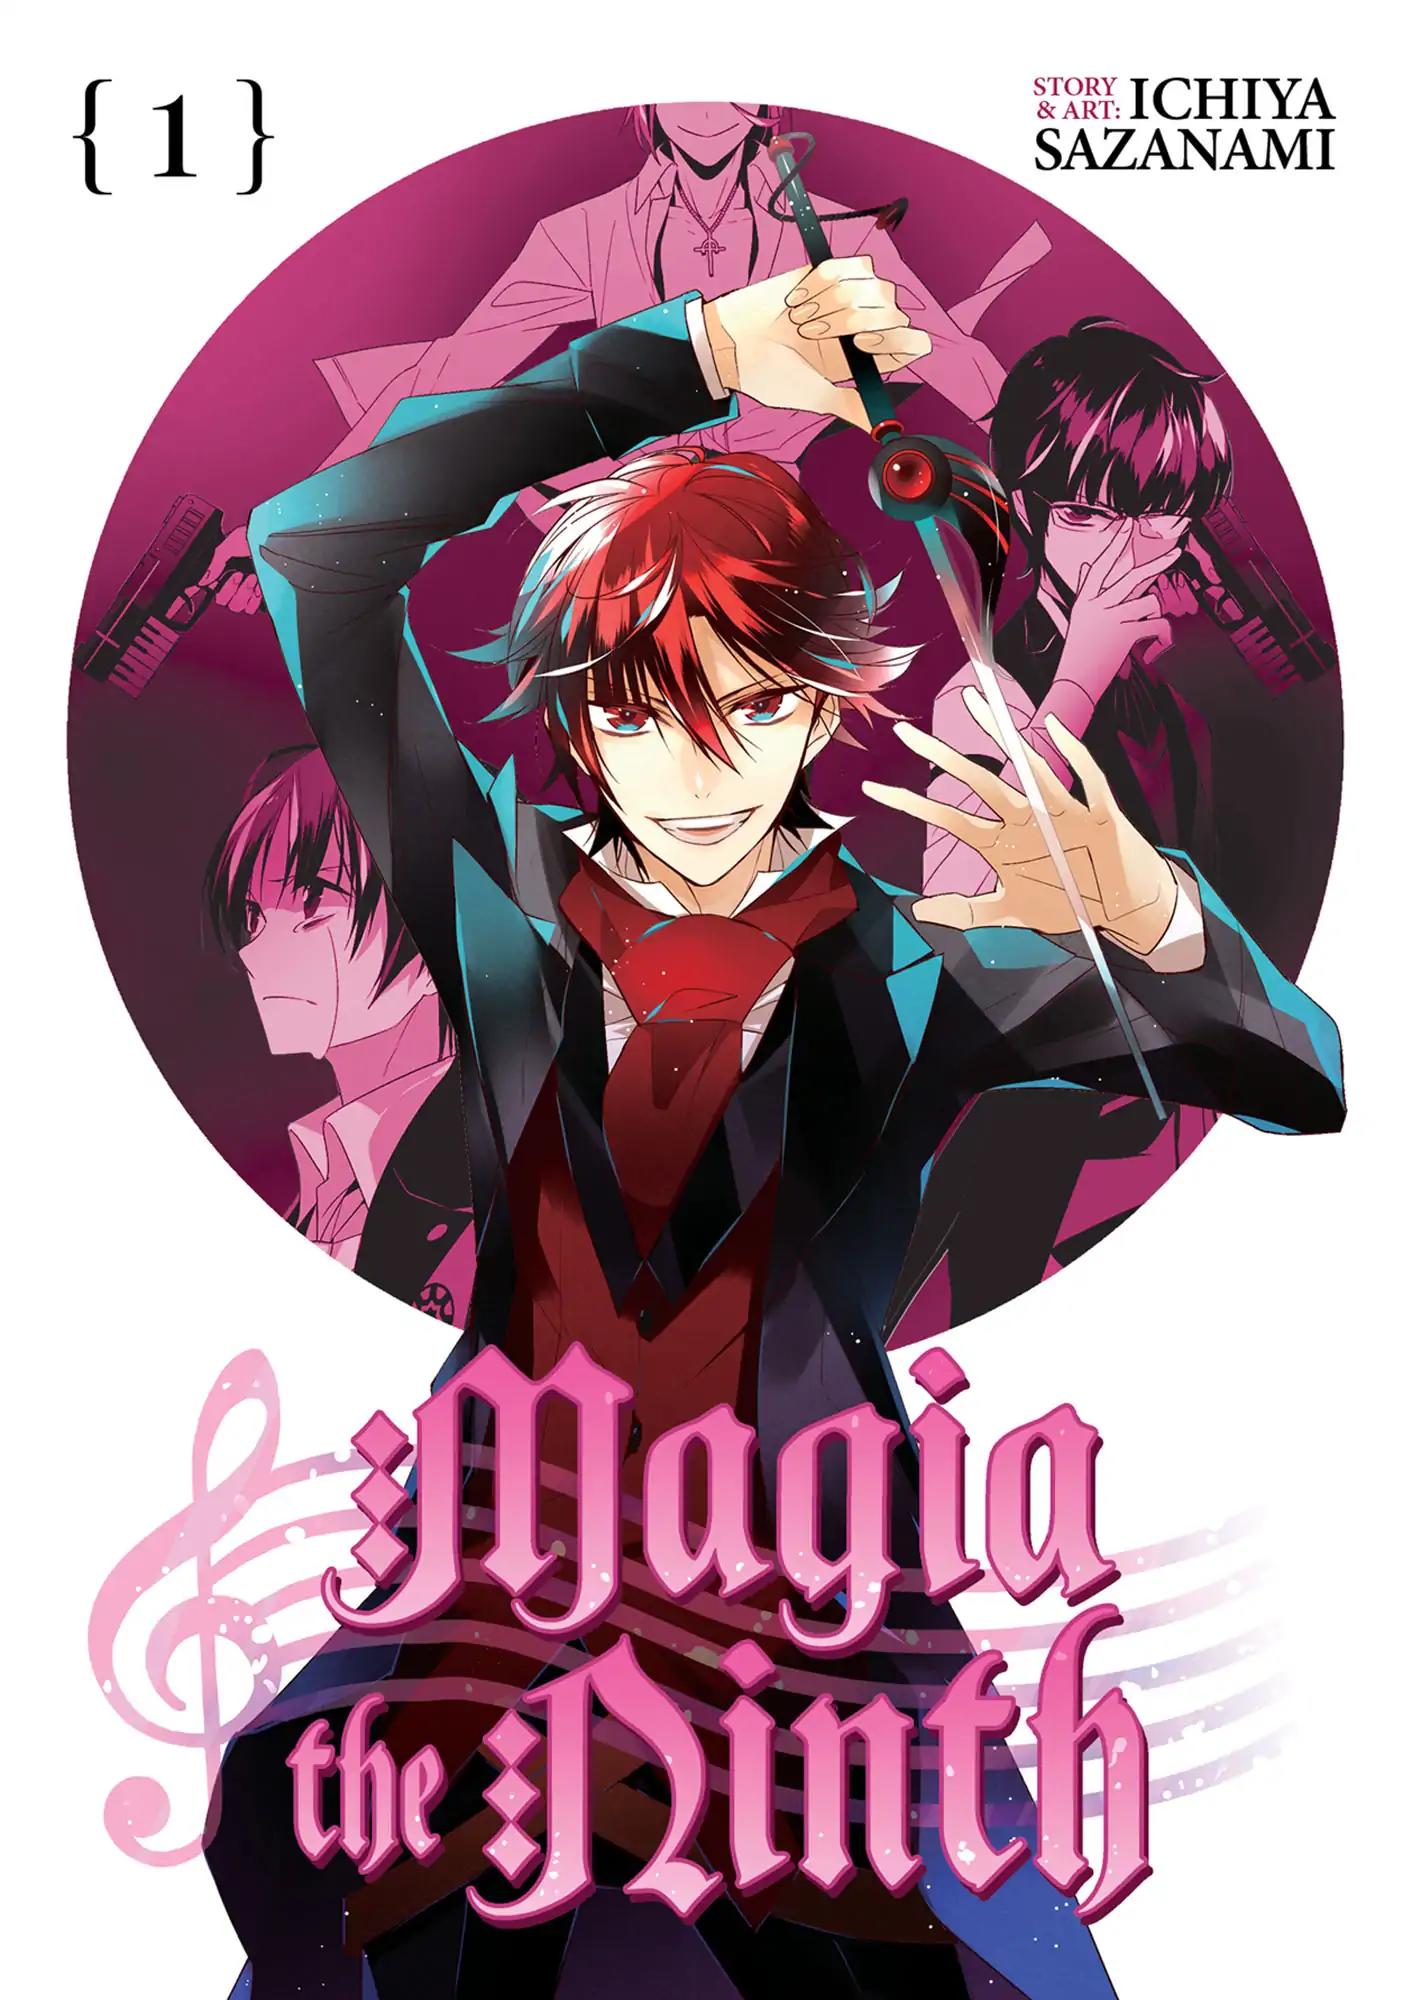 Magia the Ninth Vol.1 Chapter 1: